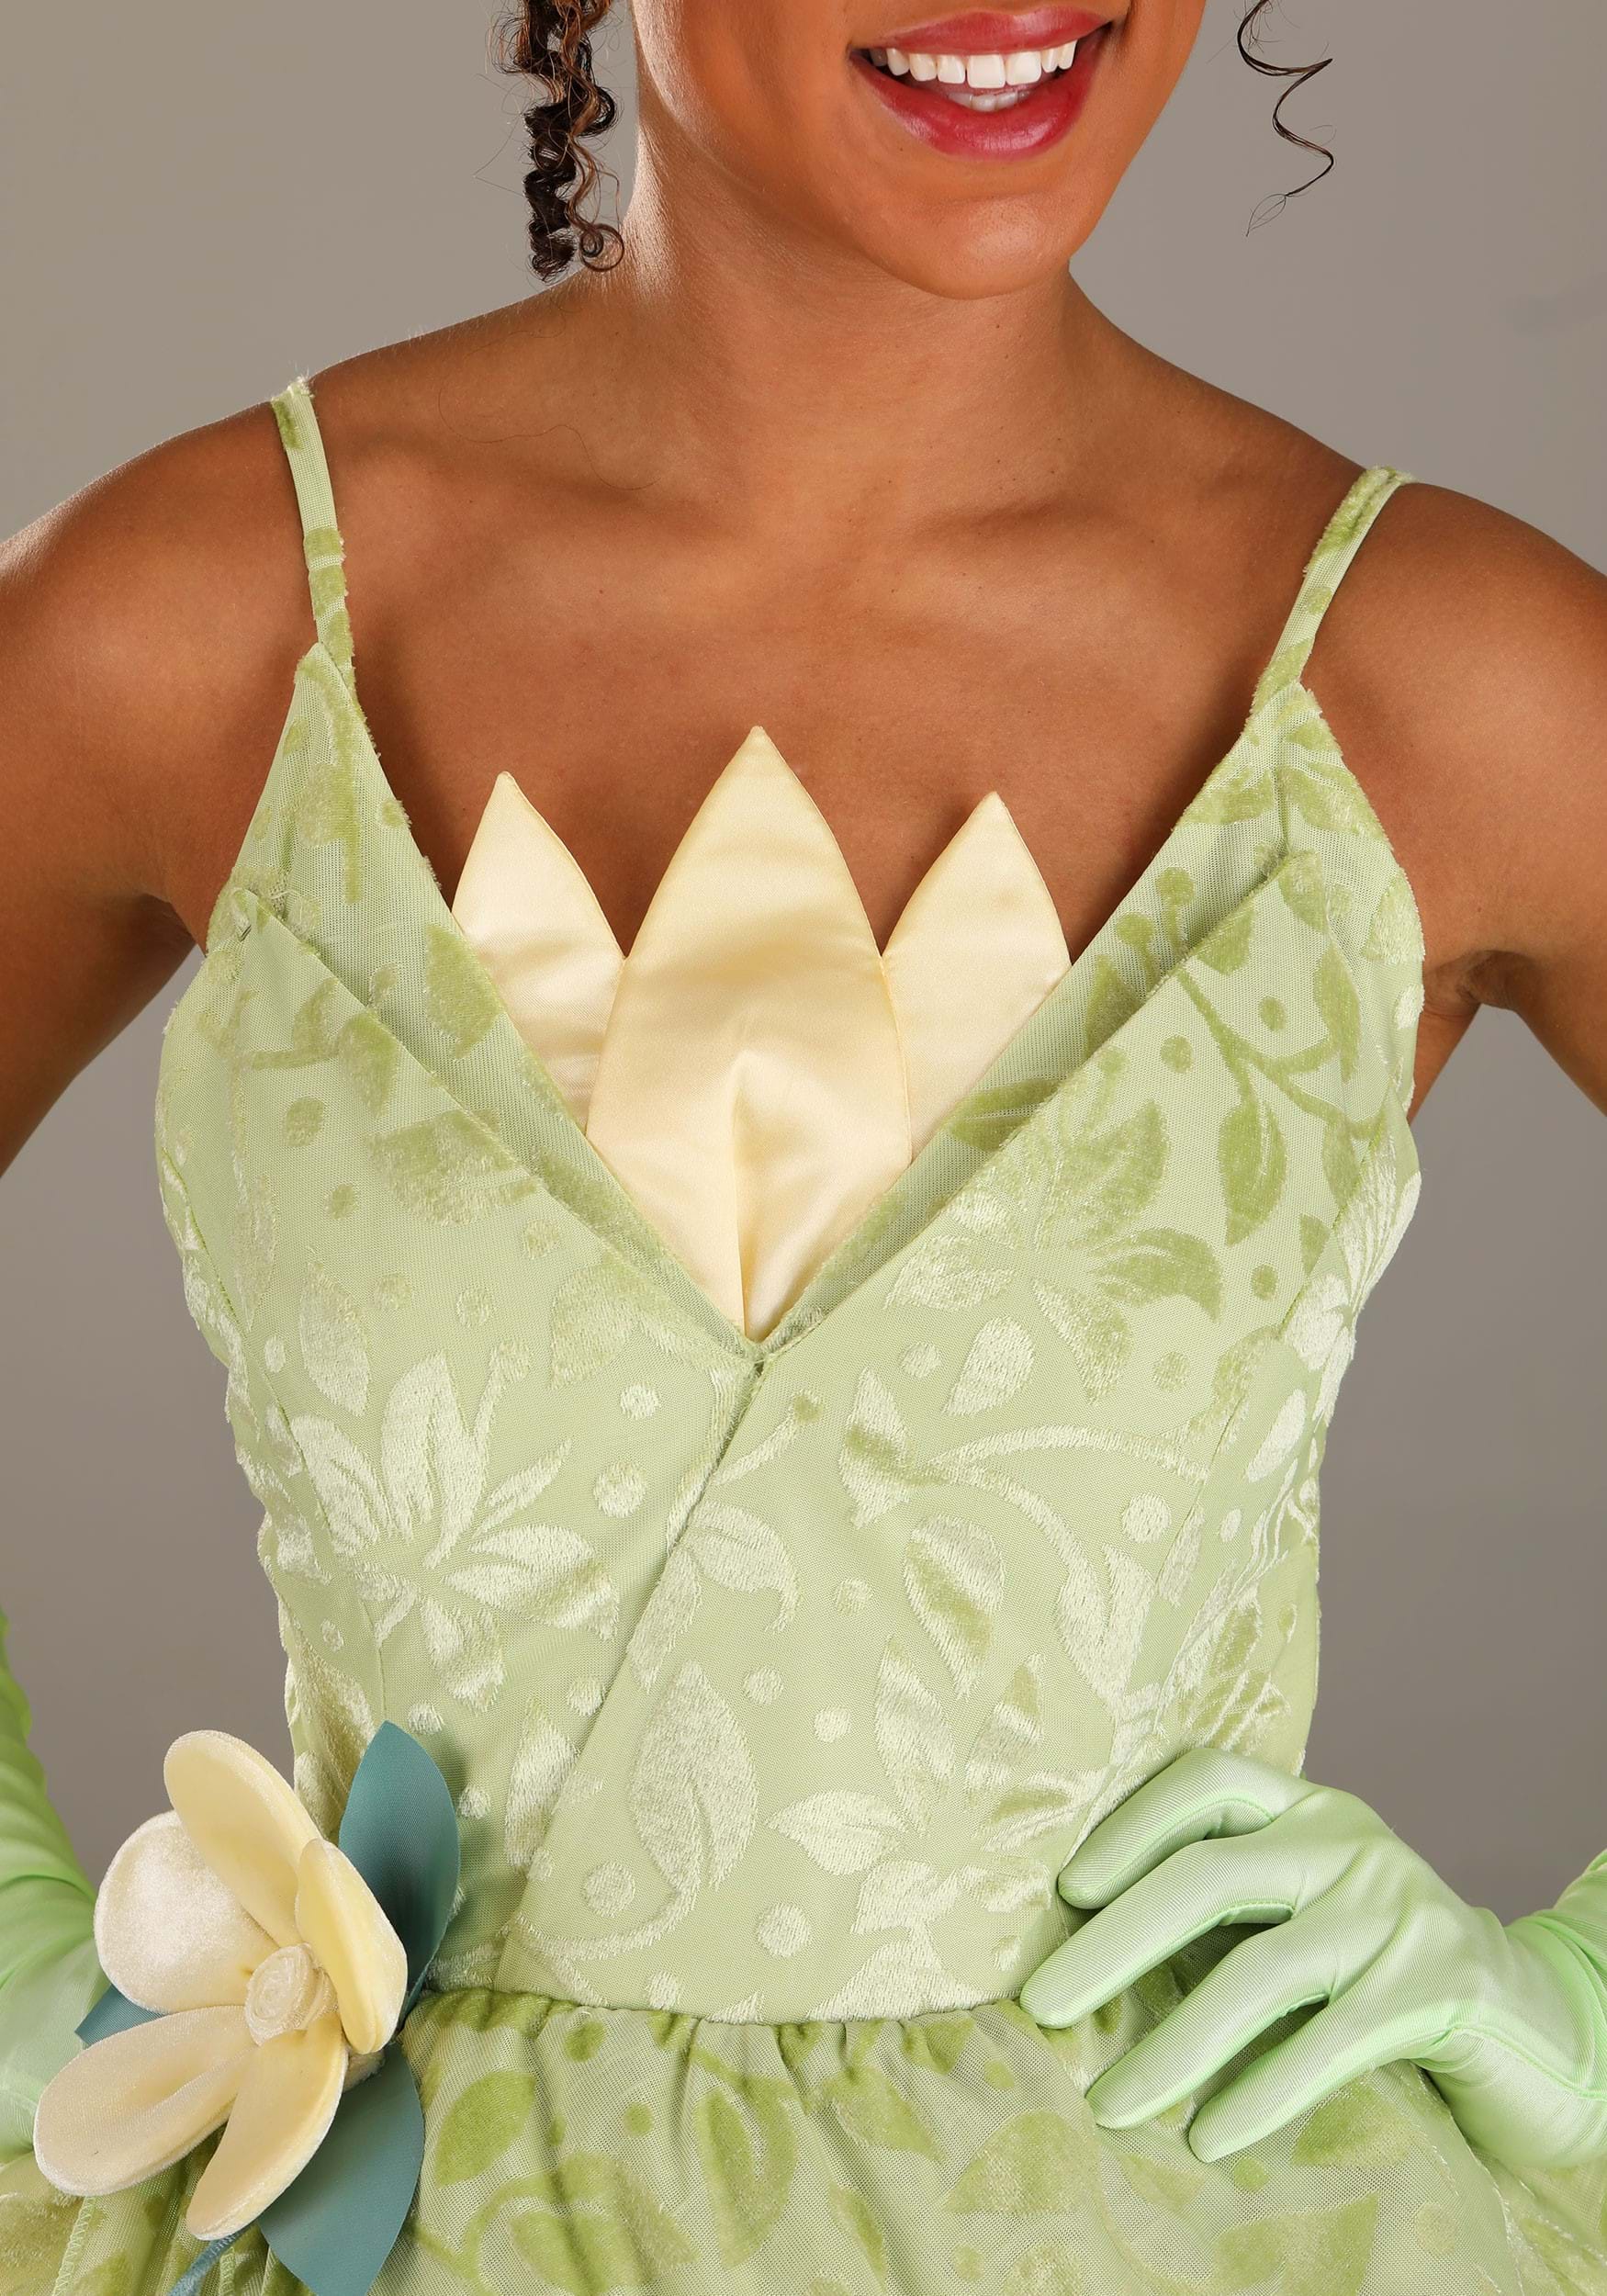 Disney Women's Princess and the Frog Deluxe Tiana Costume